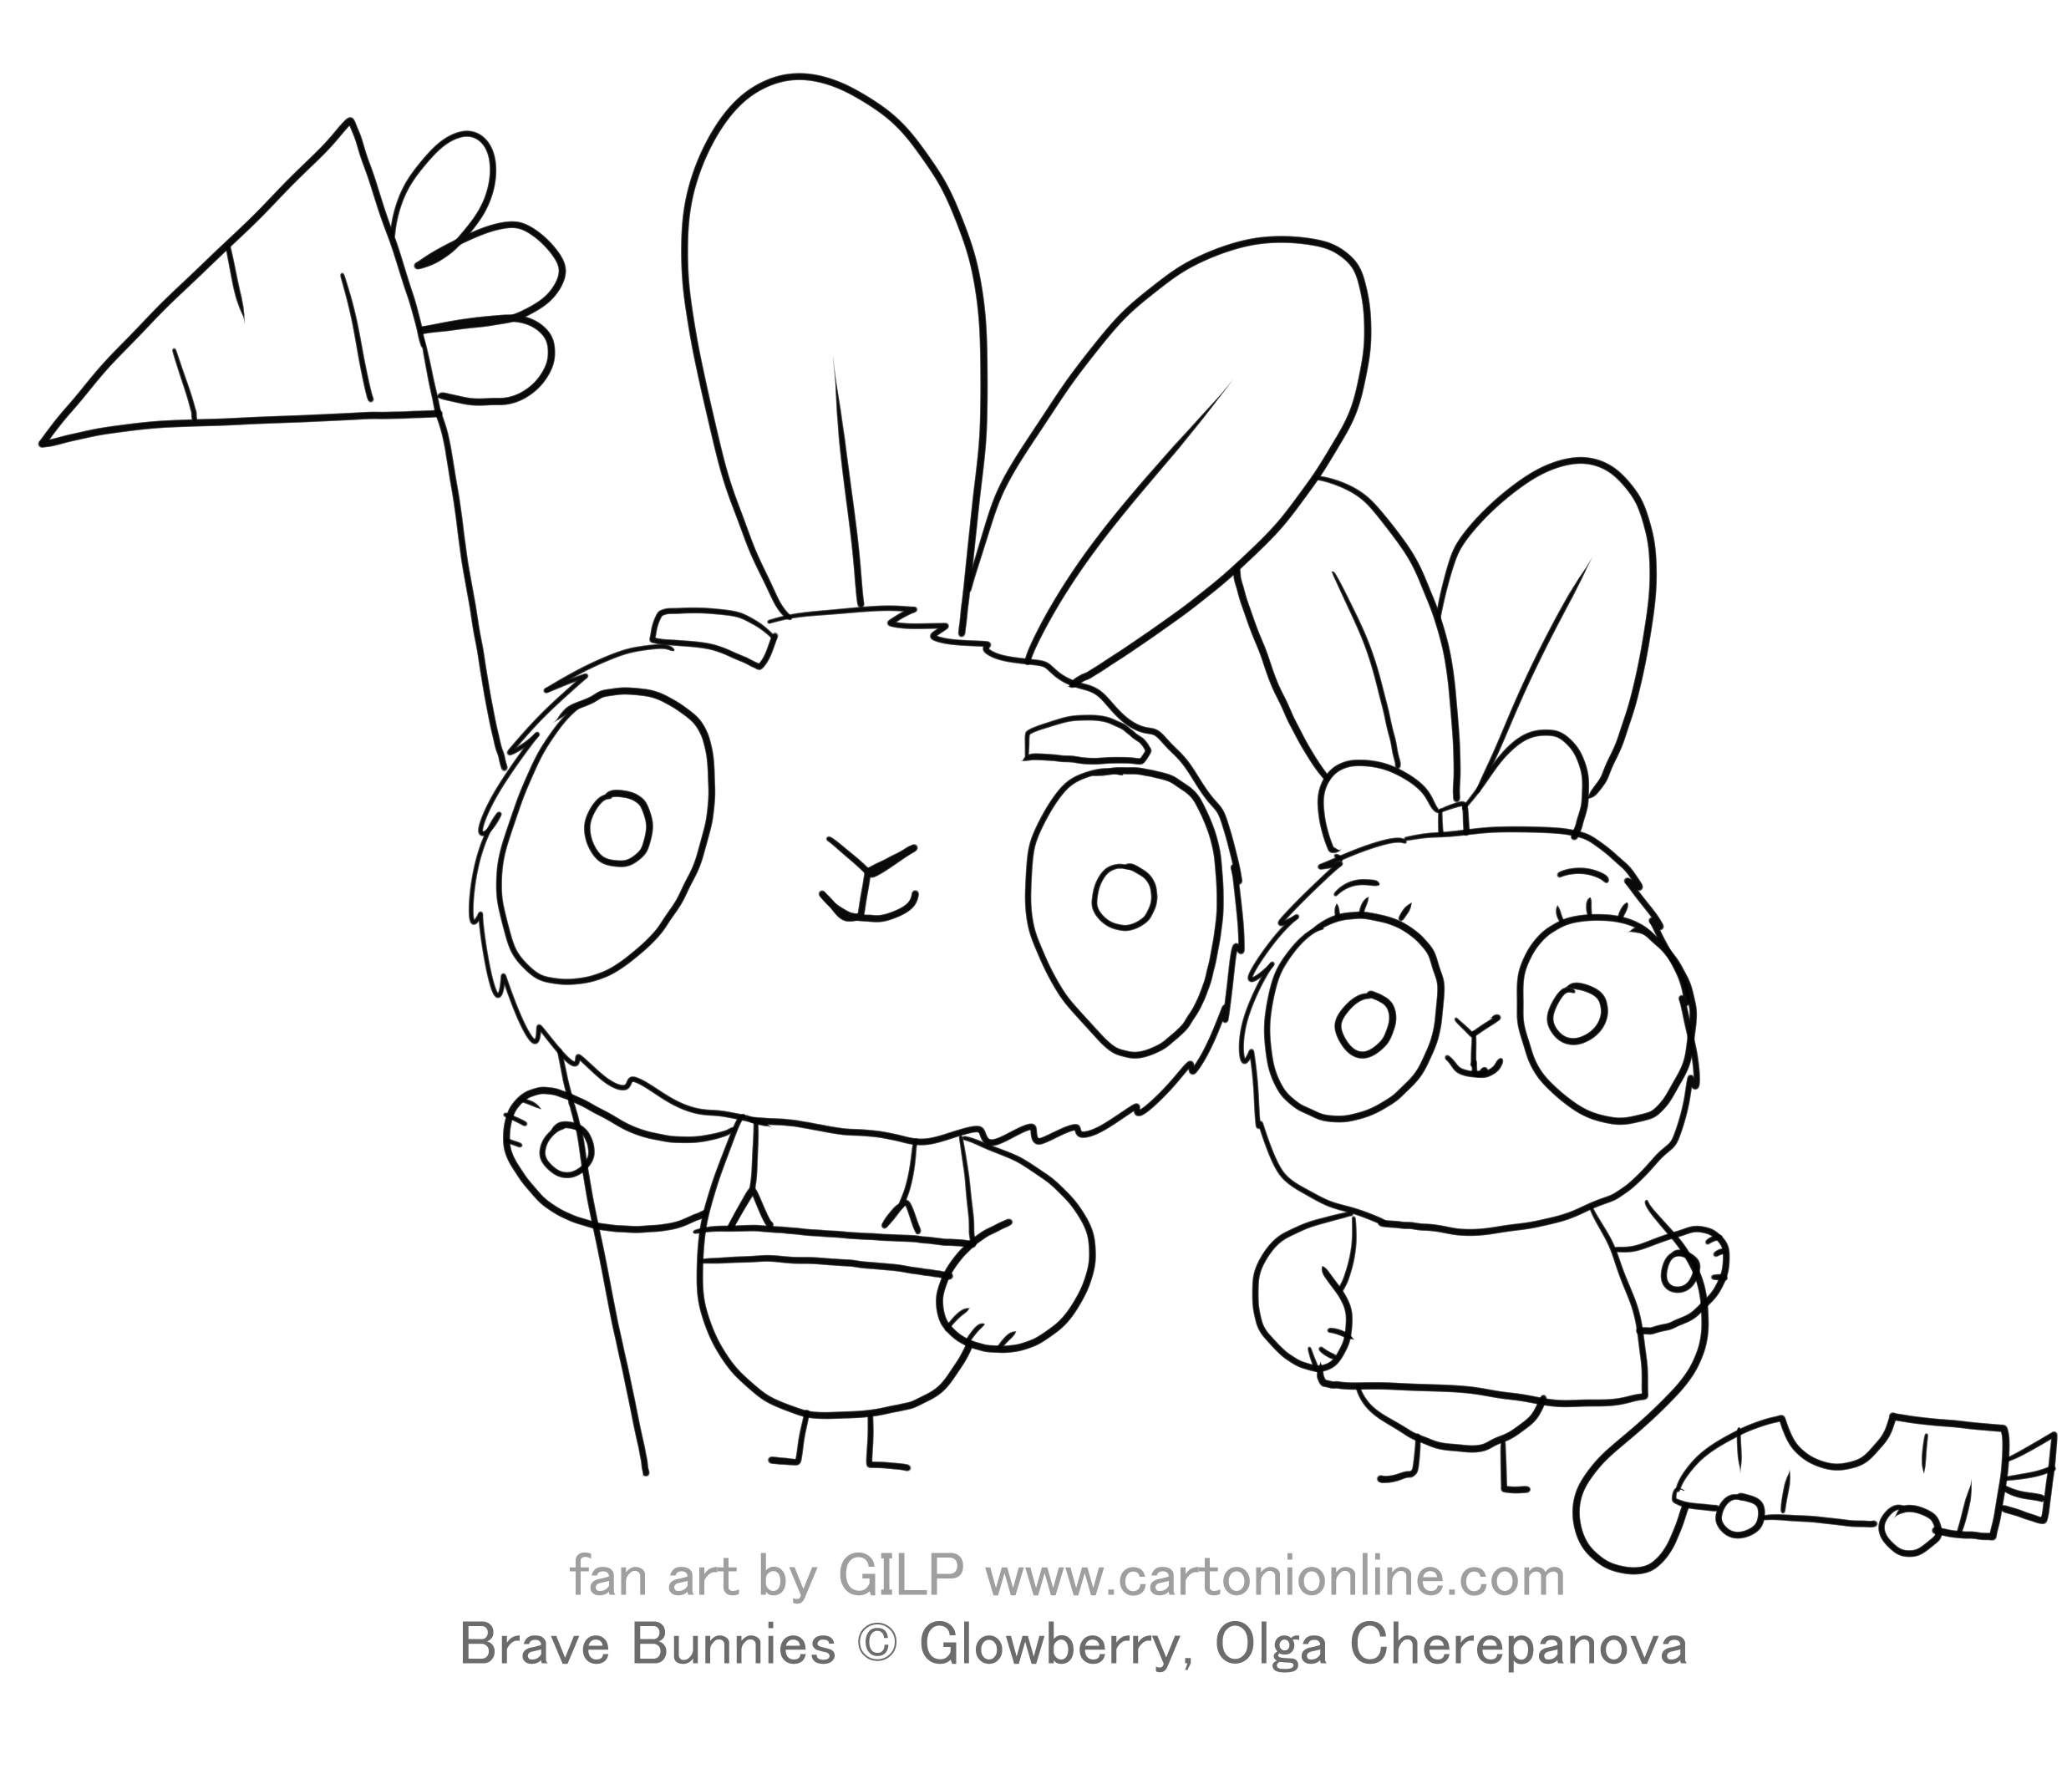 Brave Bunnies 02 from Brave Bunnies coloring page to print and coloring